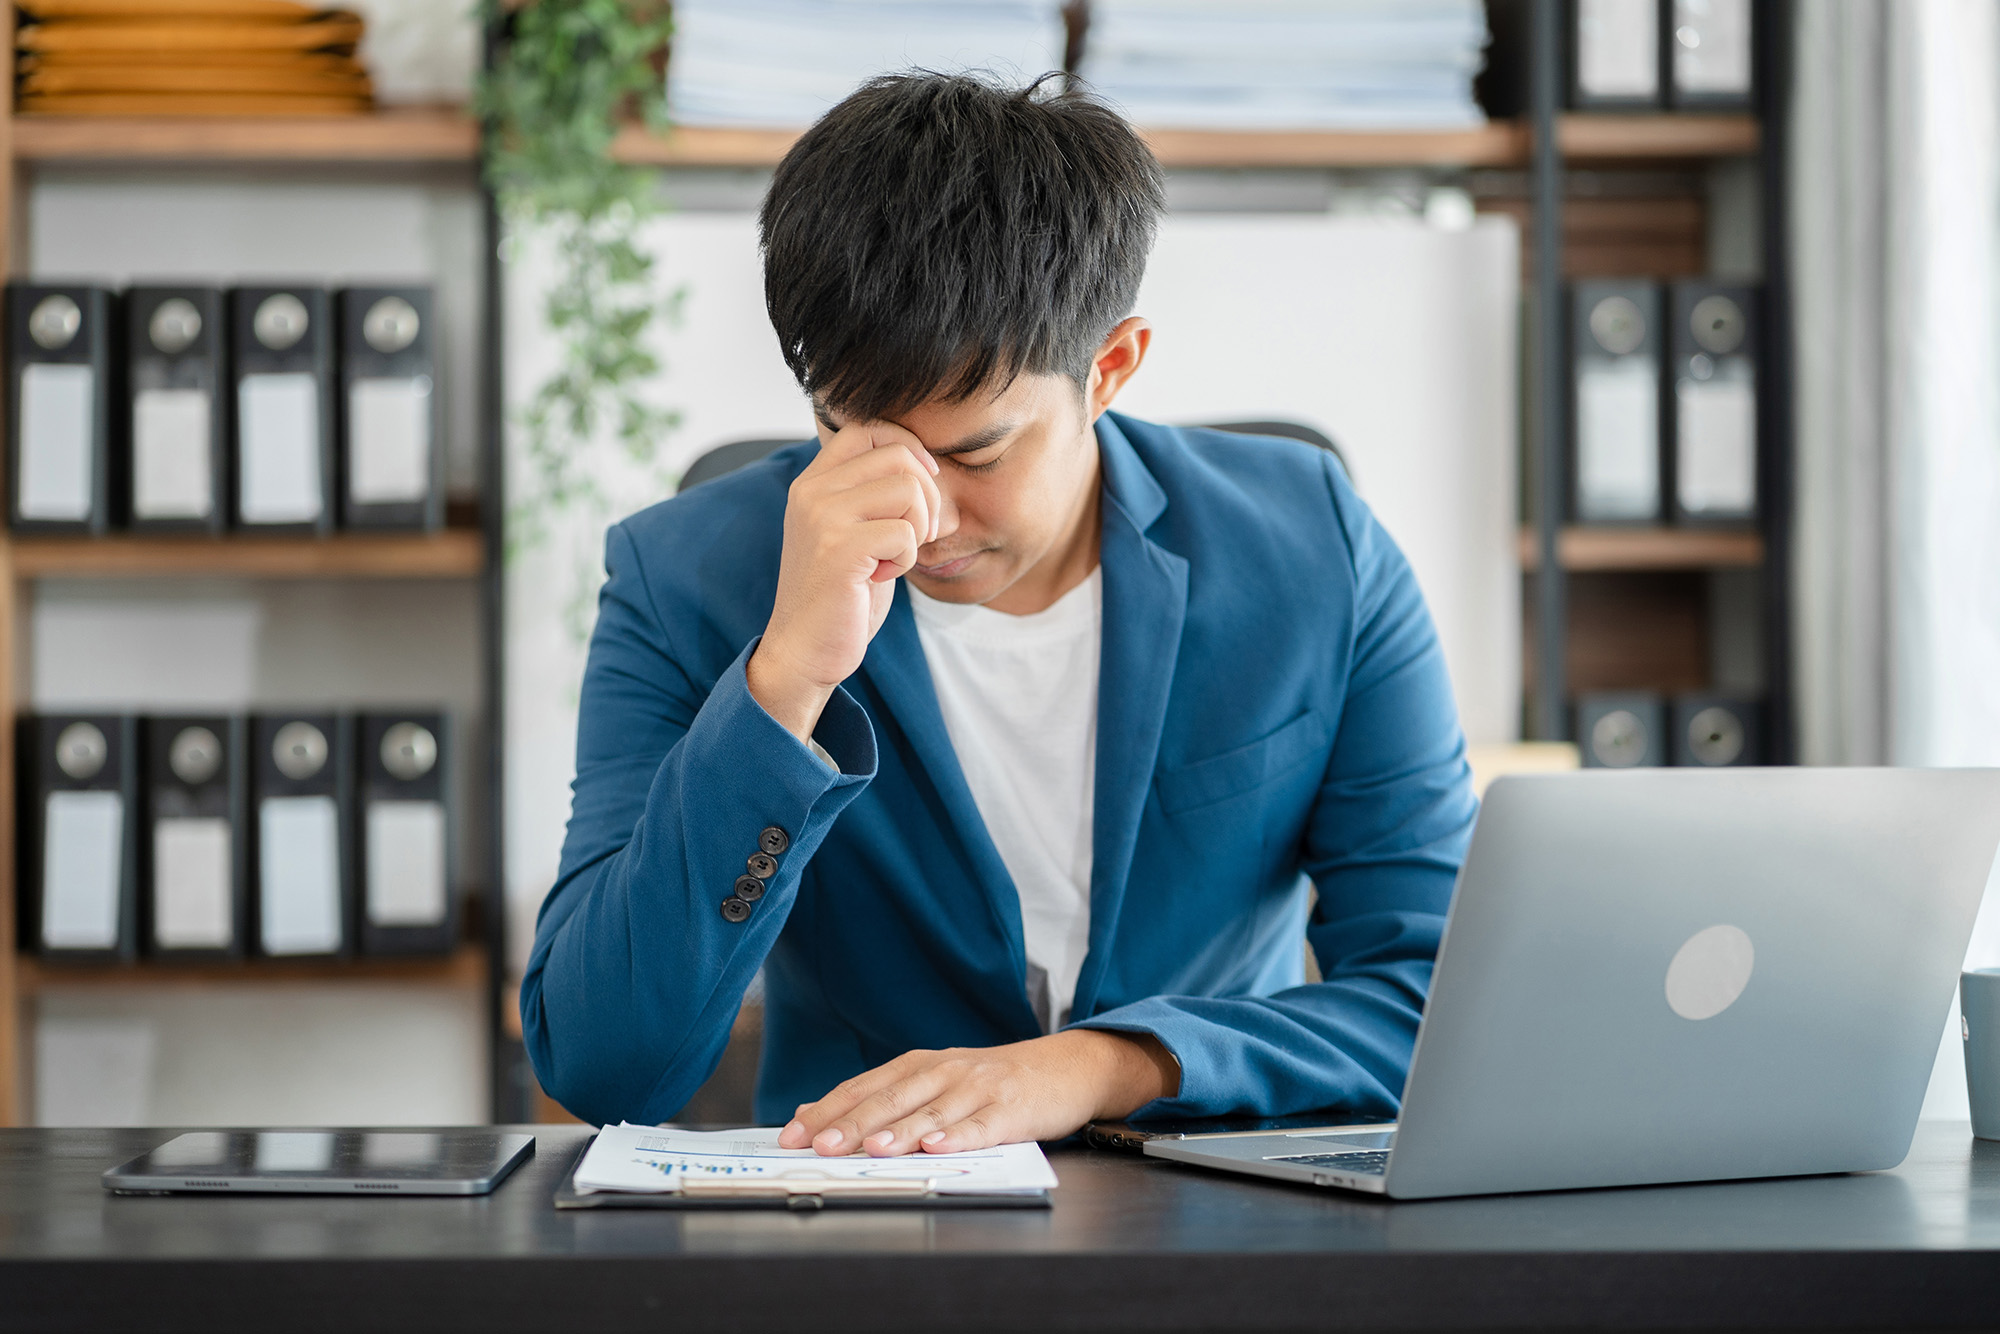 Rising Mental Health Problems at Work: a young business professional sitting at his desk with his hand over his face as he appears stressed.